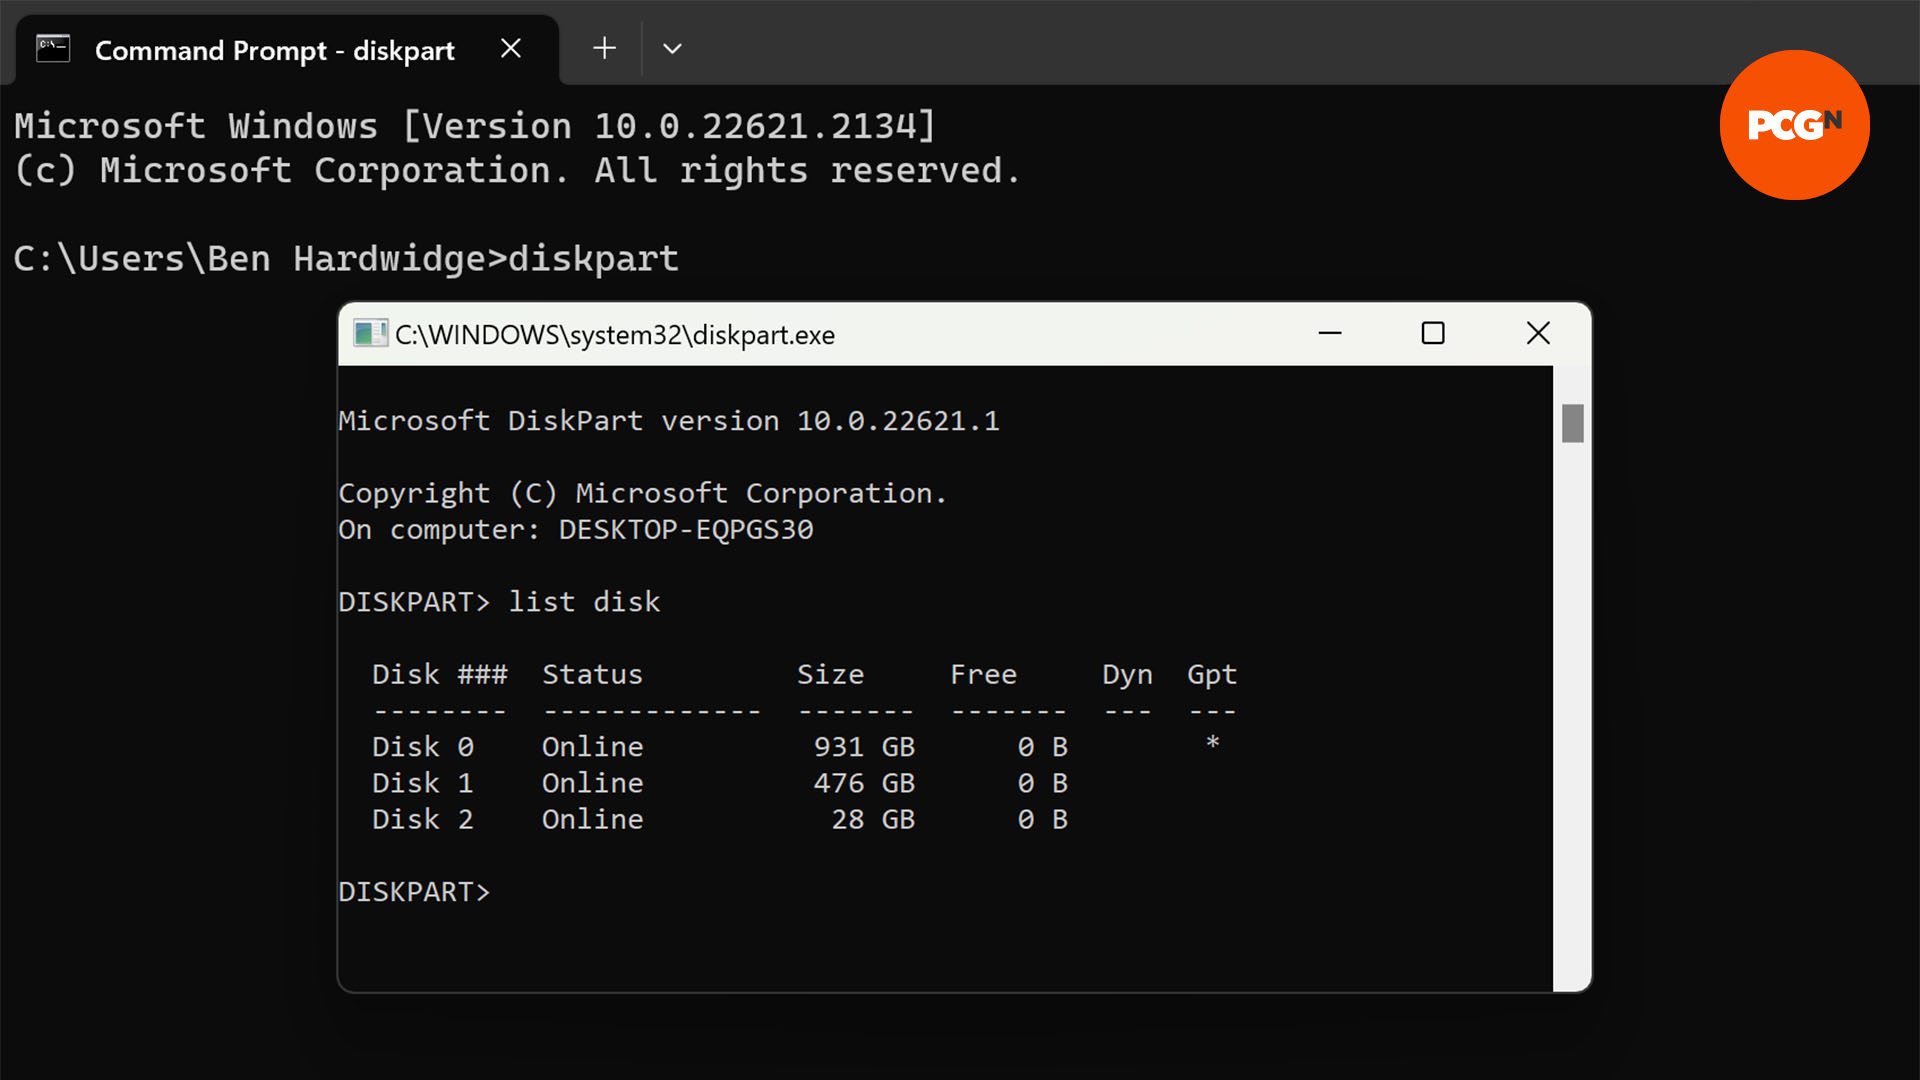 The diskpart window displaying the available disks in command prompt